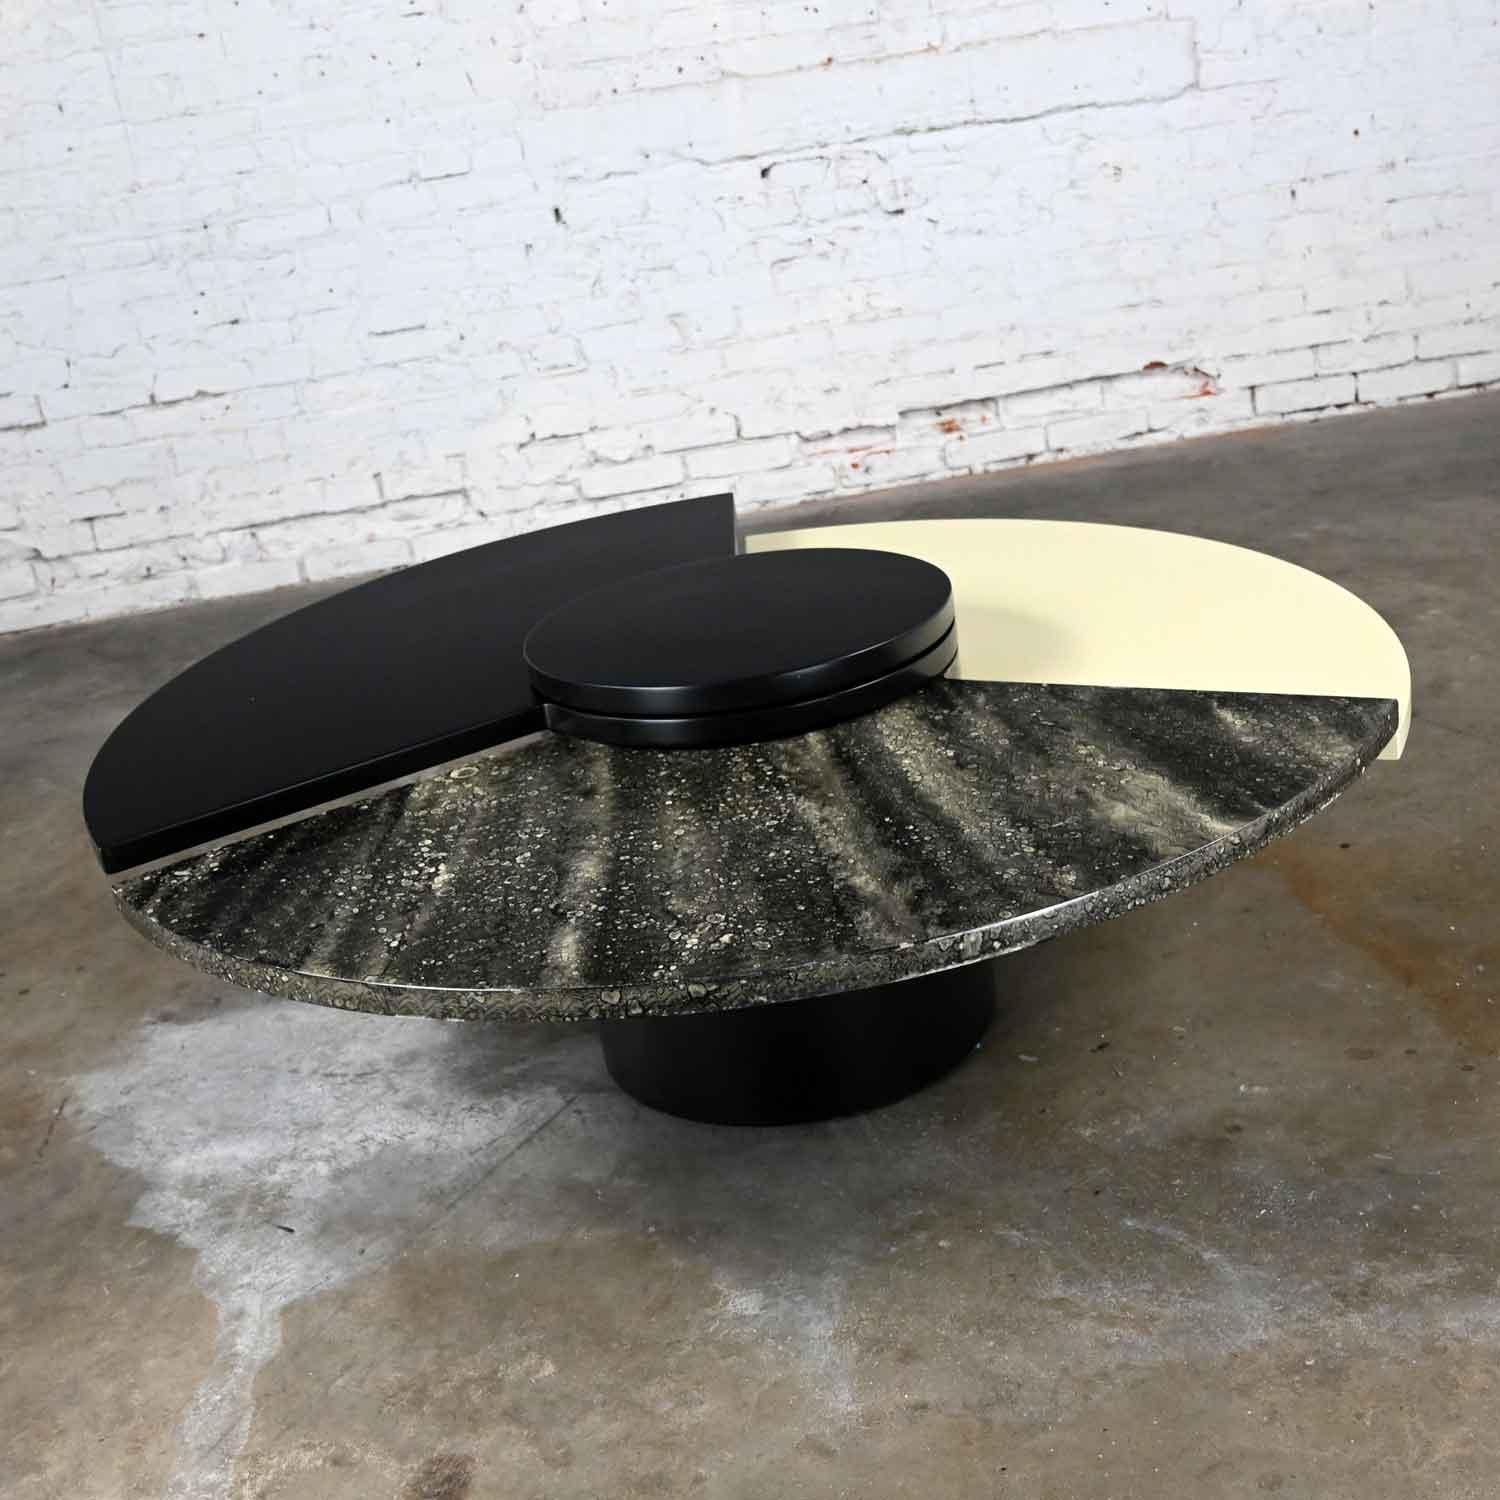 Awesome postmodern rotating coffee table comprised of a black cylinder base hosting three rotating wedges one black, one off white, & one faux marble finished lacquered MDF or Medium Density Fiberboard after Dakota Jackson’s Self Winding Coffee